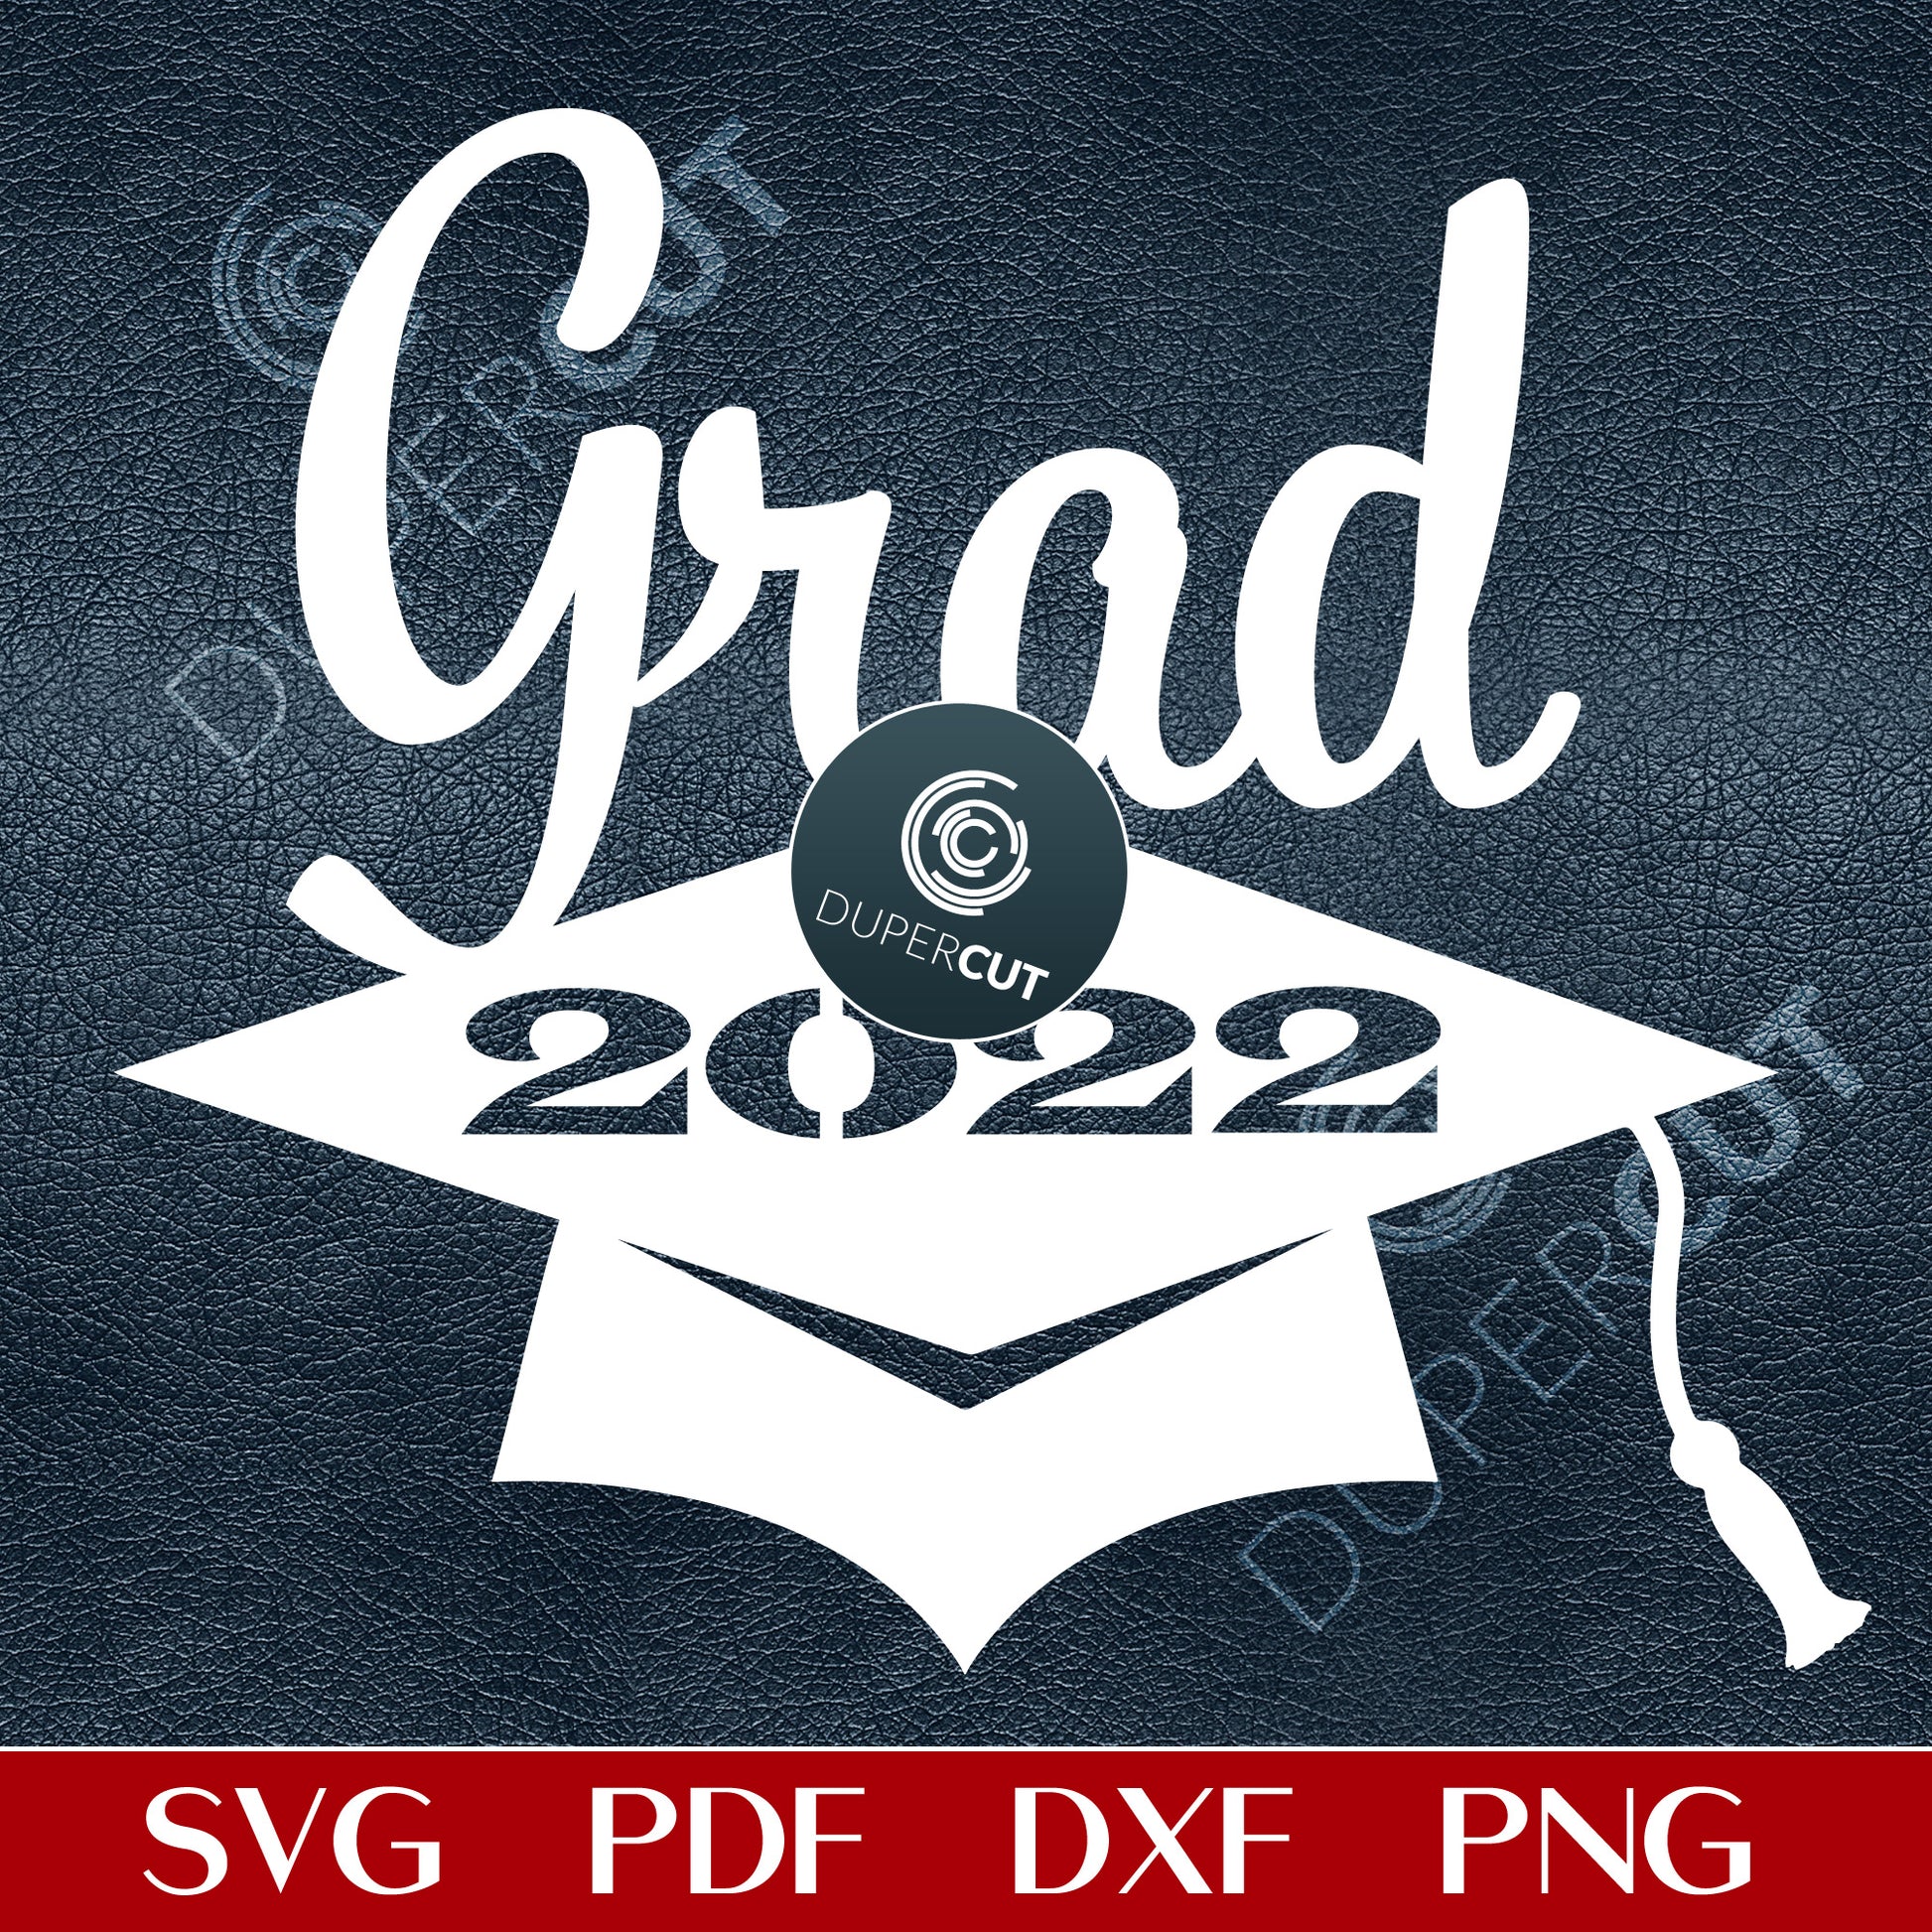 Graduation 2022 DIY cake topper template - SVG DXF PNG cutting files for Cricut, Glowforge, Silhouette Cameo, laser machines